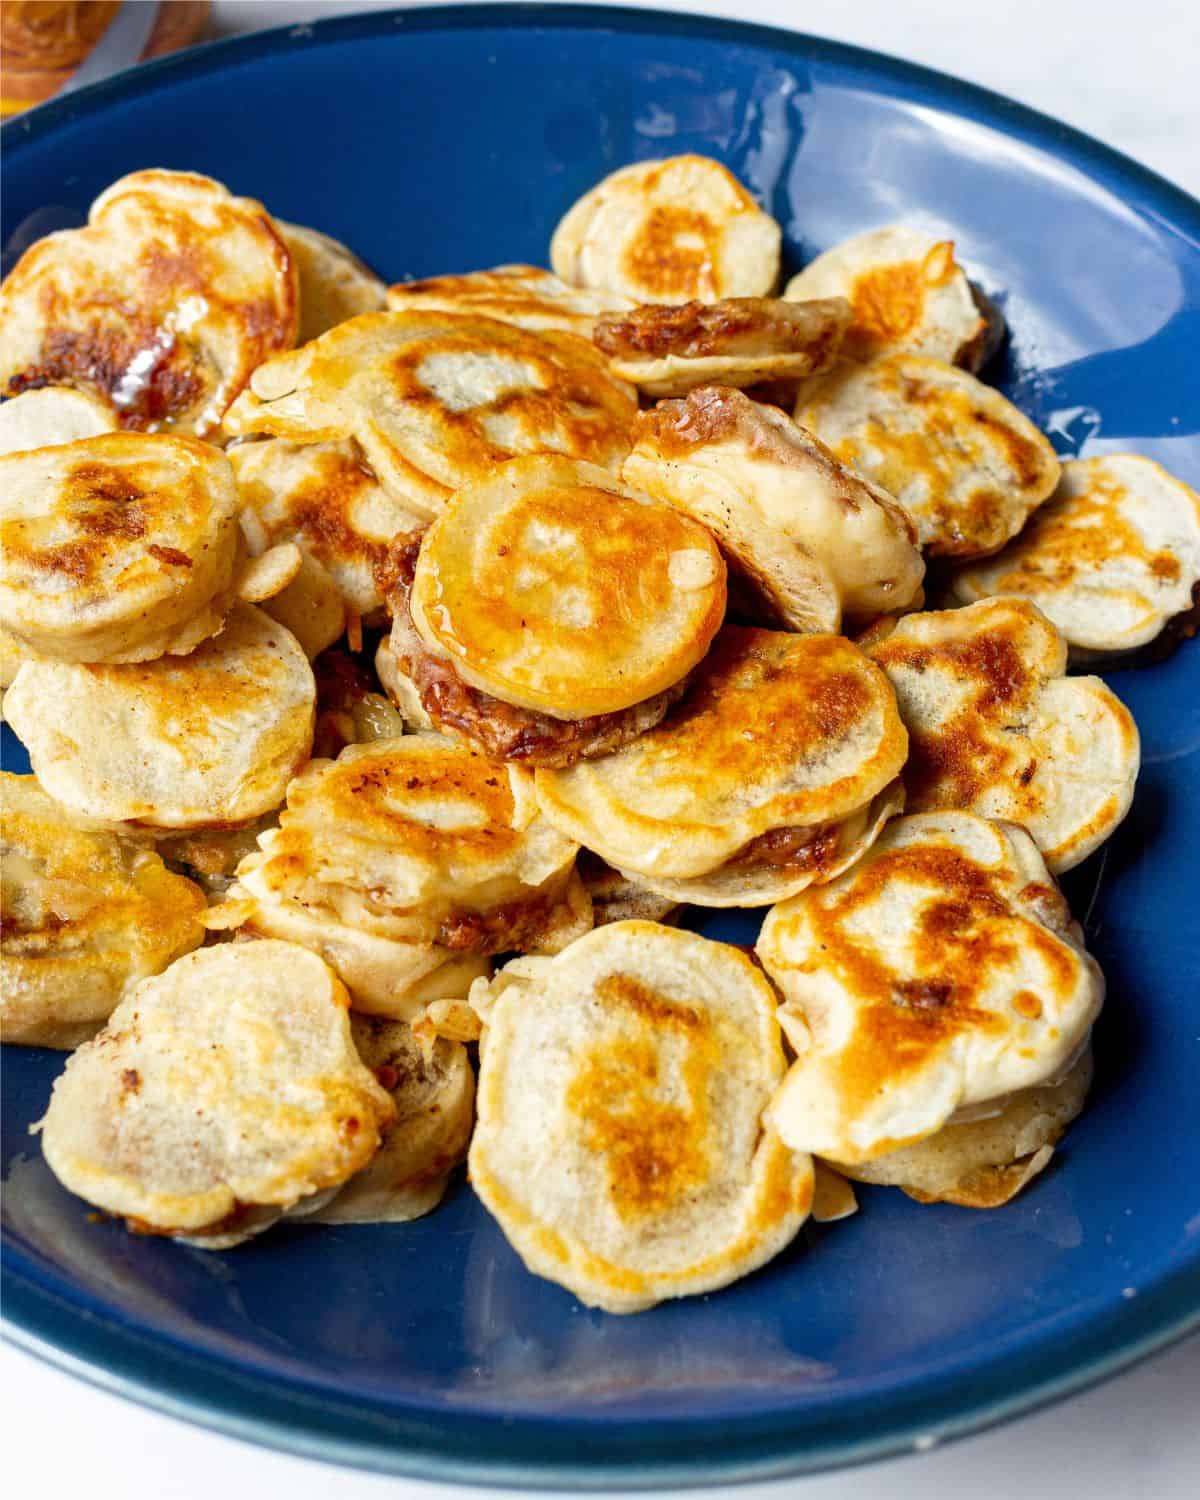 https://beatthebudget.com/wp-content/uploads/2022/05/Mini-Pancakes-with-Biscoff-featured-image-1200-x-1500px.jpg